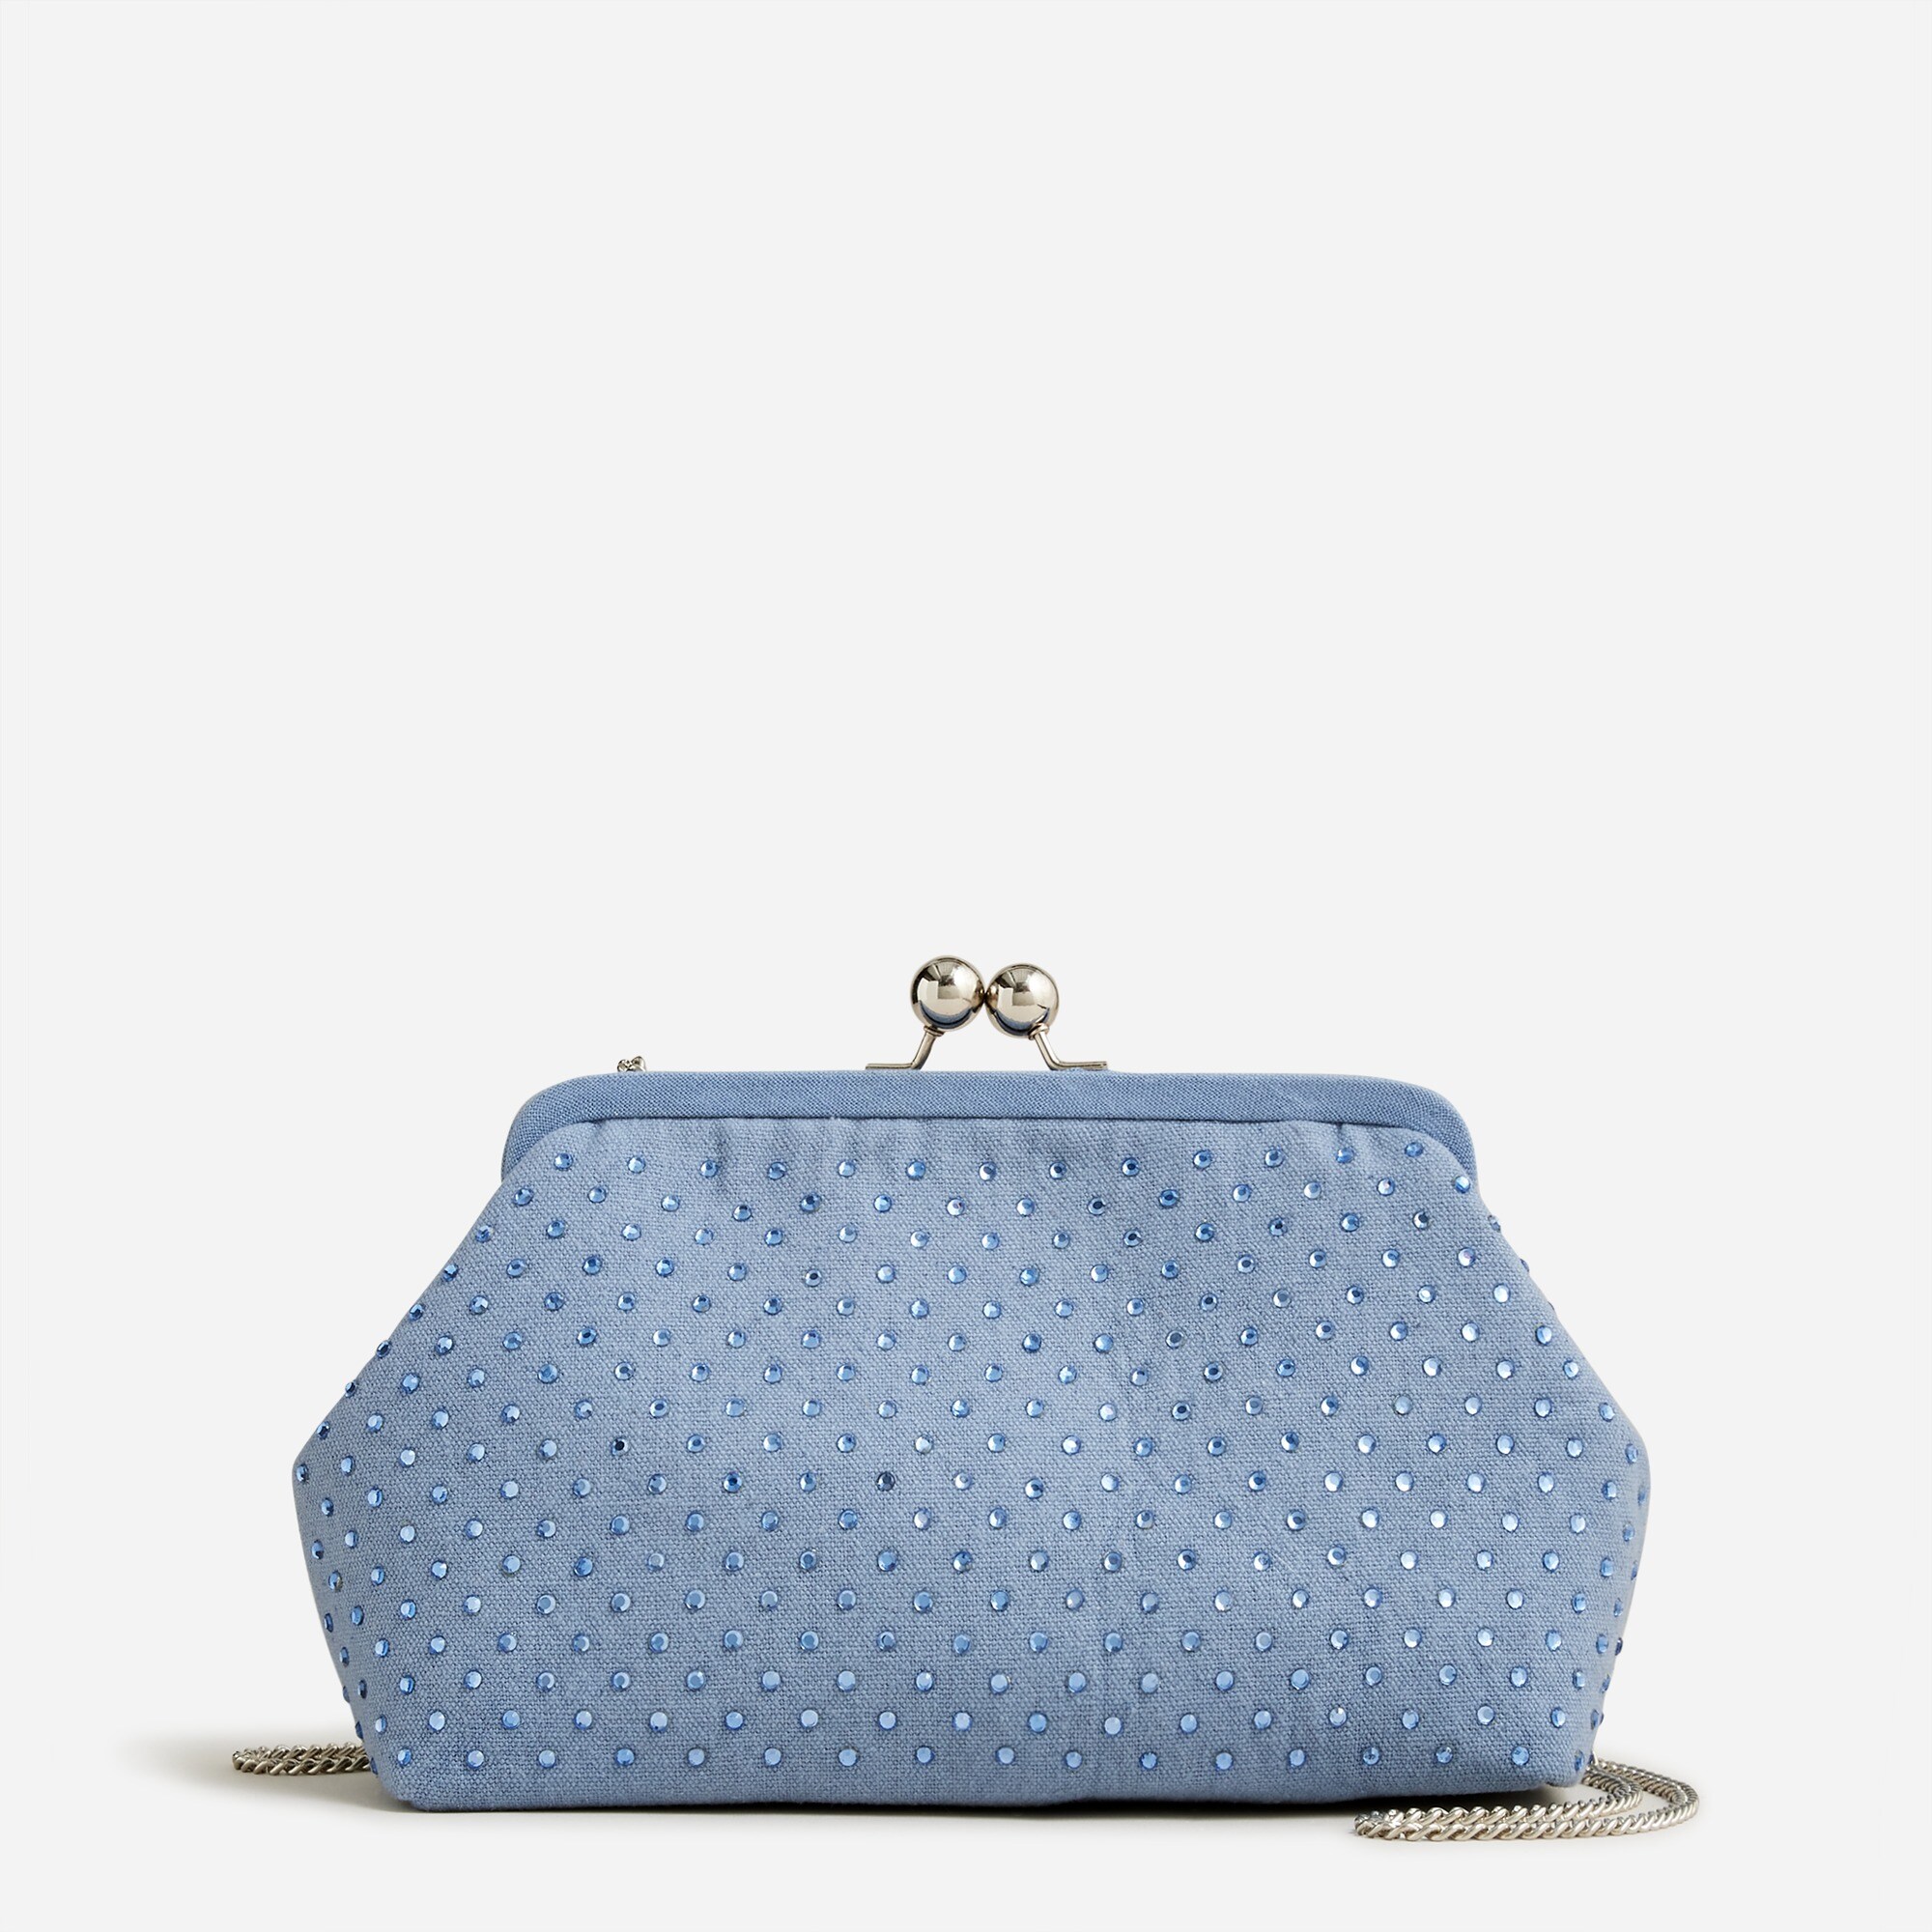 J.Crew: Canvas Clutch With Crystals For Women